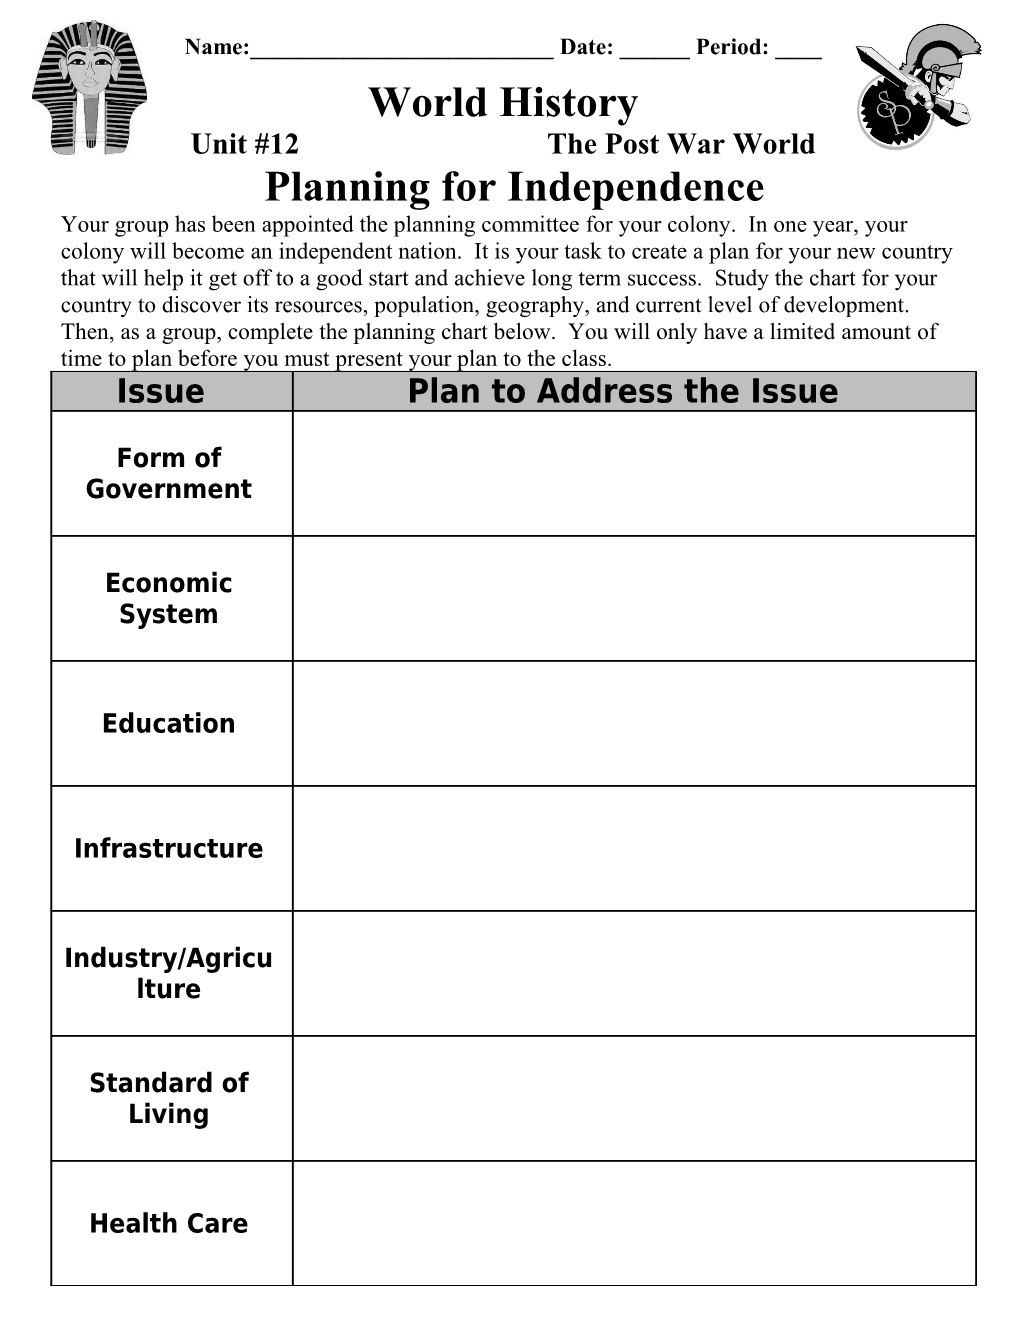 Planning for Independence